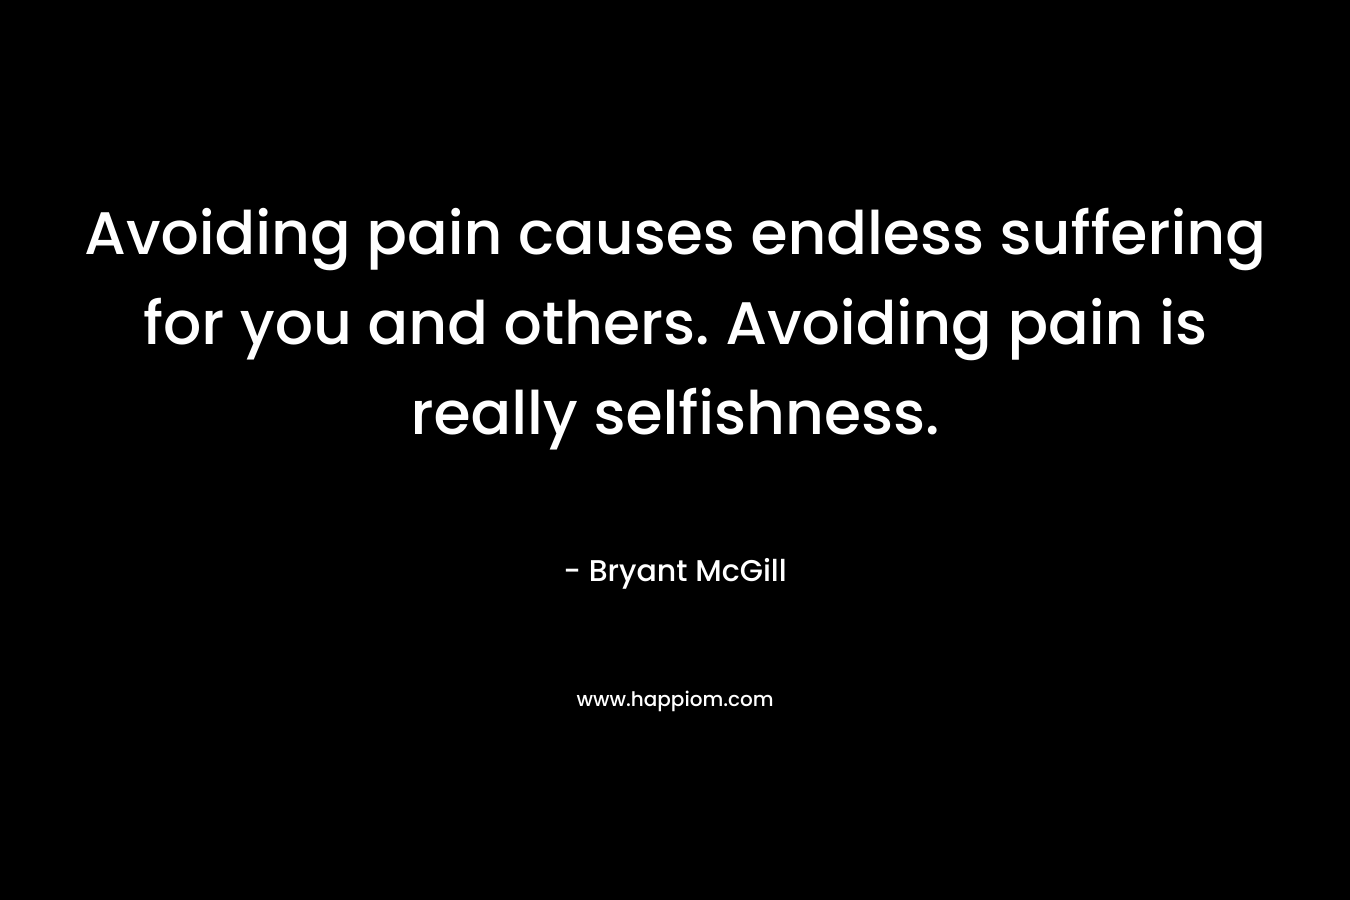 Avoiding pain causes endless suffering for you and others. Avoiding pain is really selfishness. – Bryant McGill